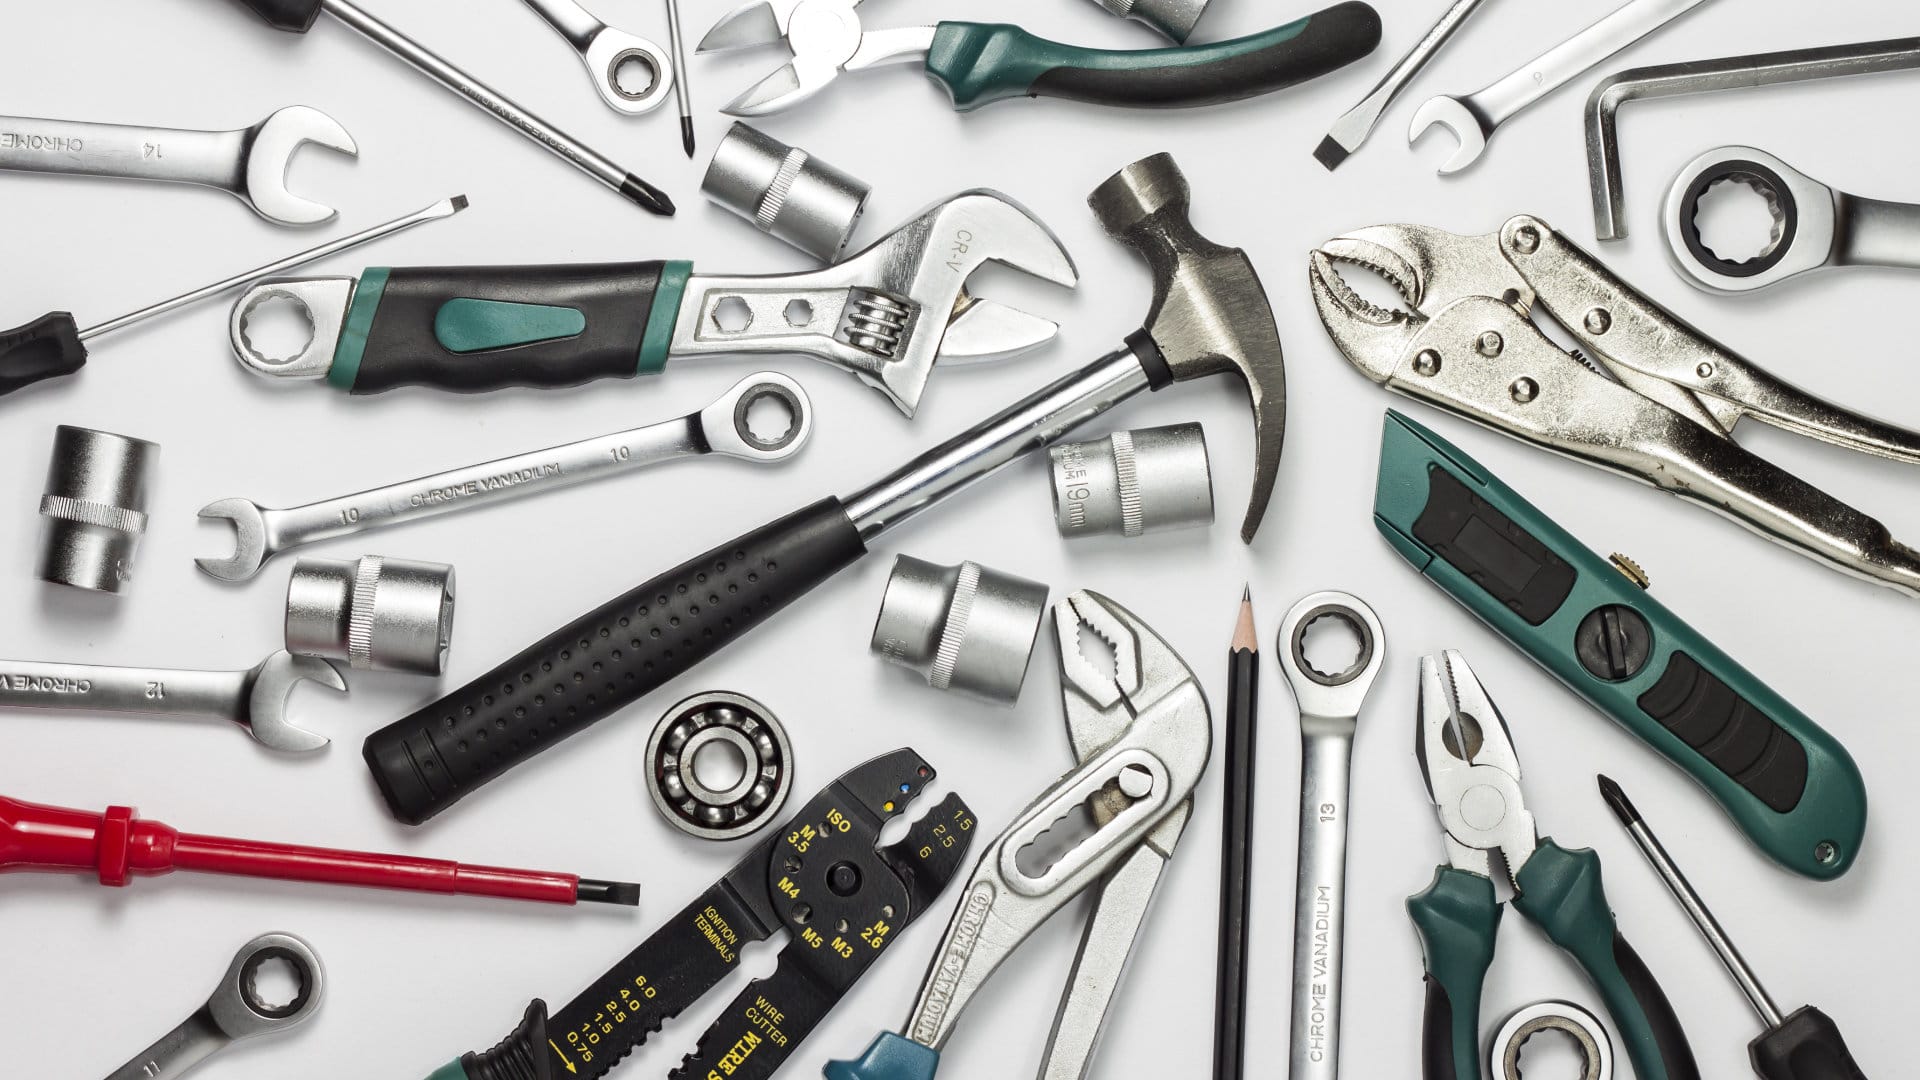 15 Facts About Tools 1701447648 